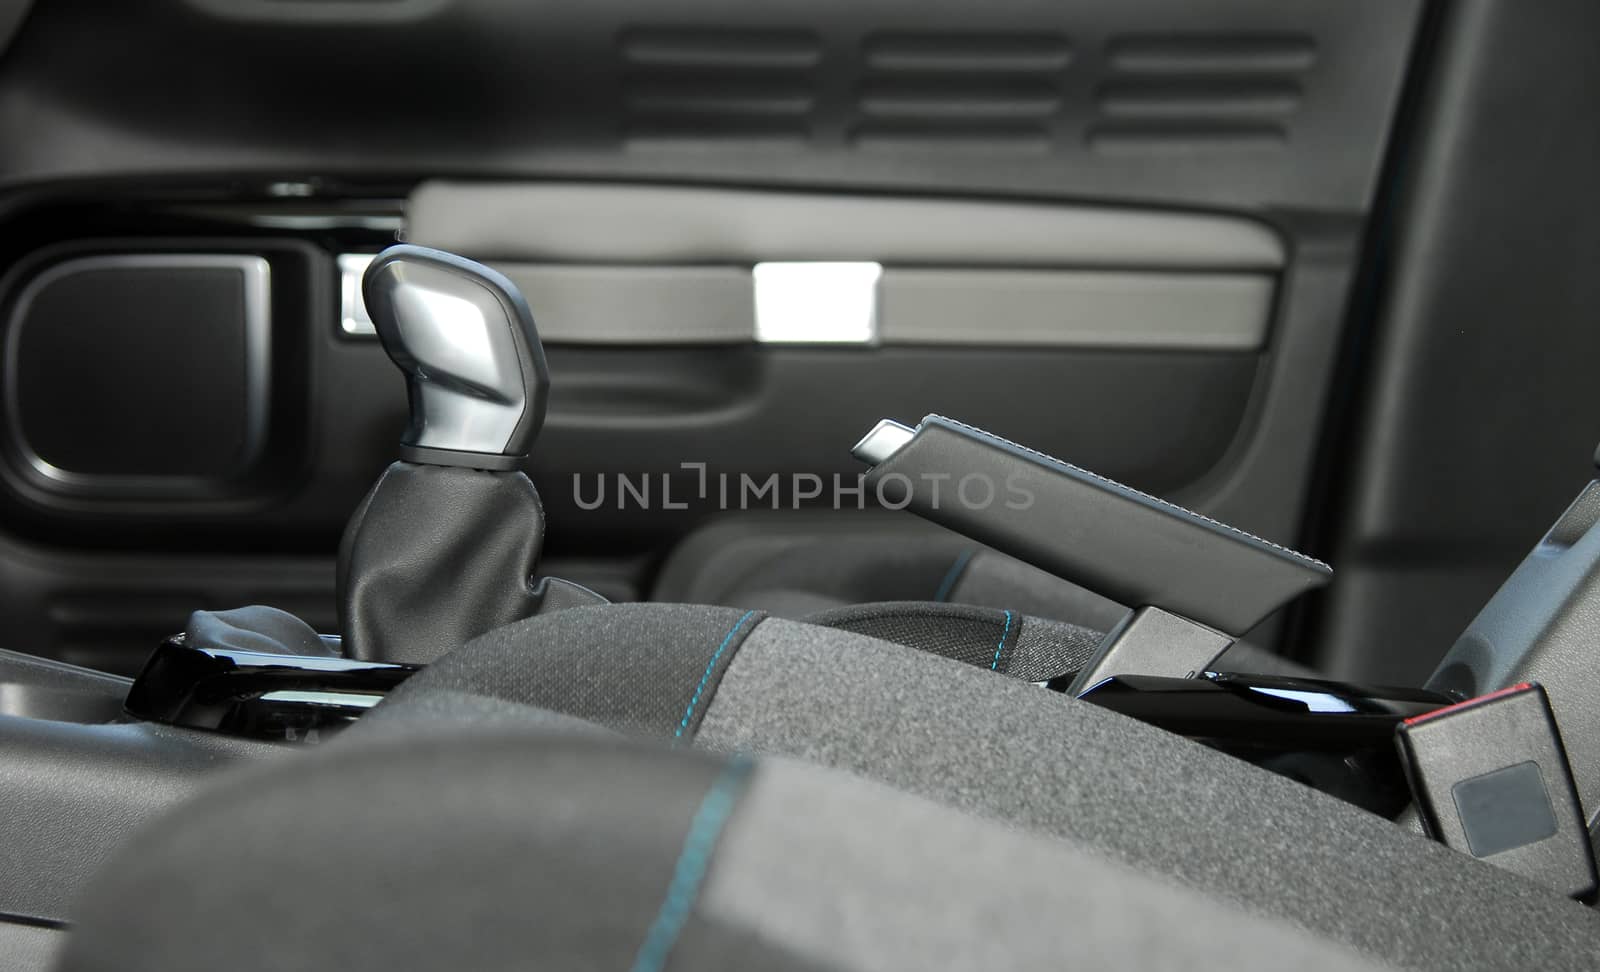 detail in the interior of the modern car